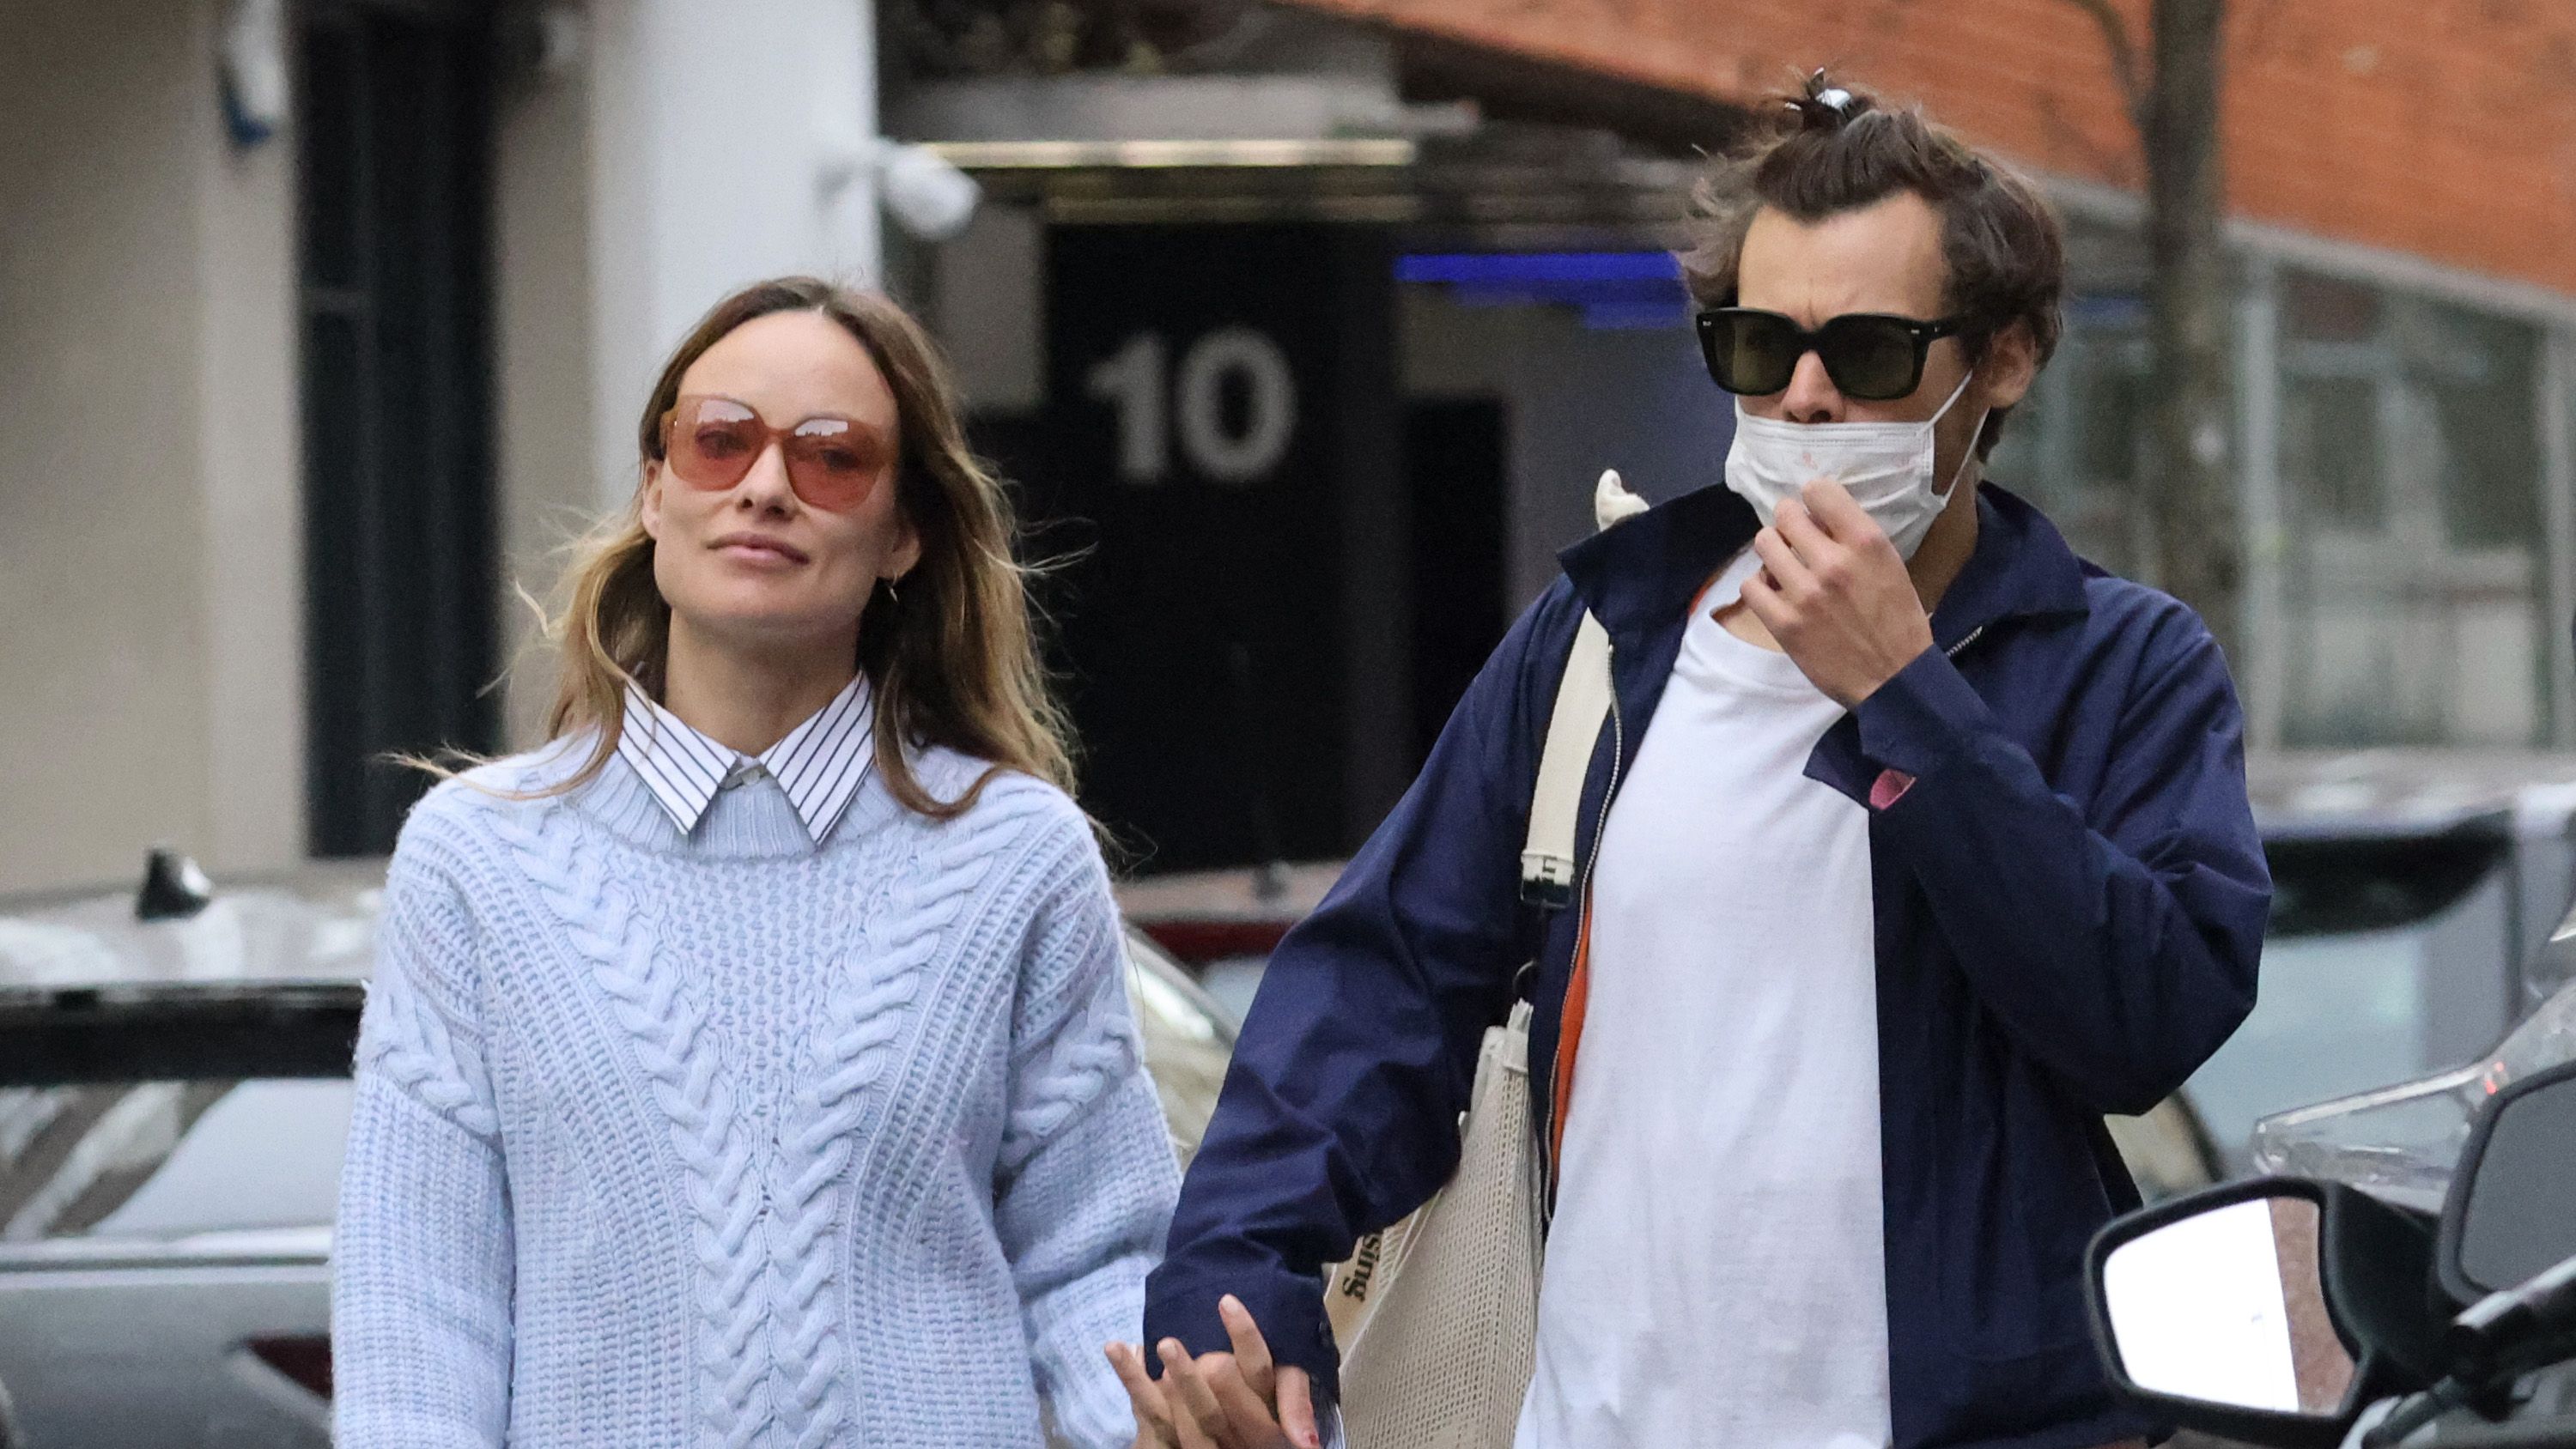 https://hips.hearstapps.com/hmg-prod/images/harry-styles-and-olivia-wilde-are-seen-in-soho-on-march-15-news-photo-1670589273.jpg?crop=1xw:0.70313xh;center,top